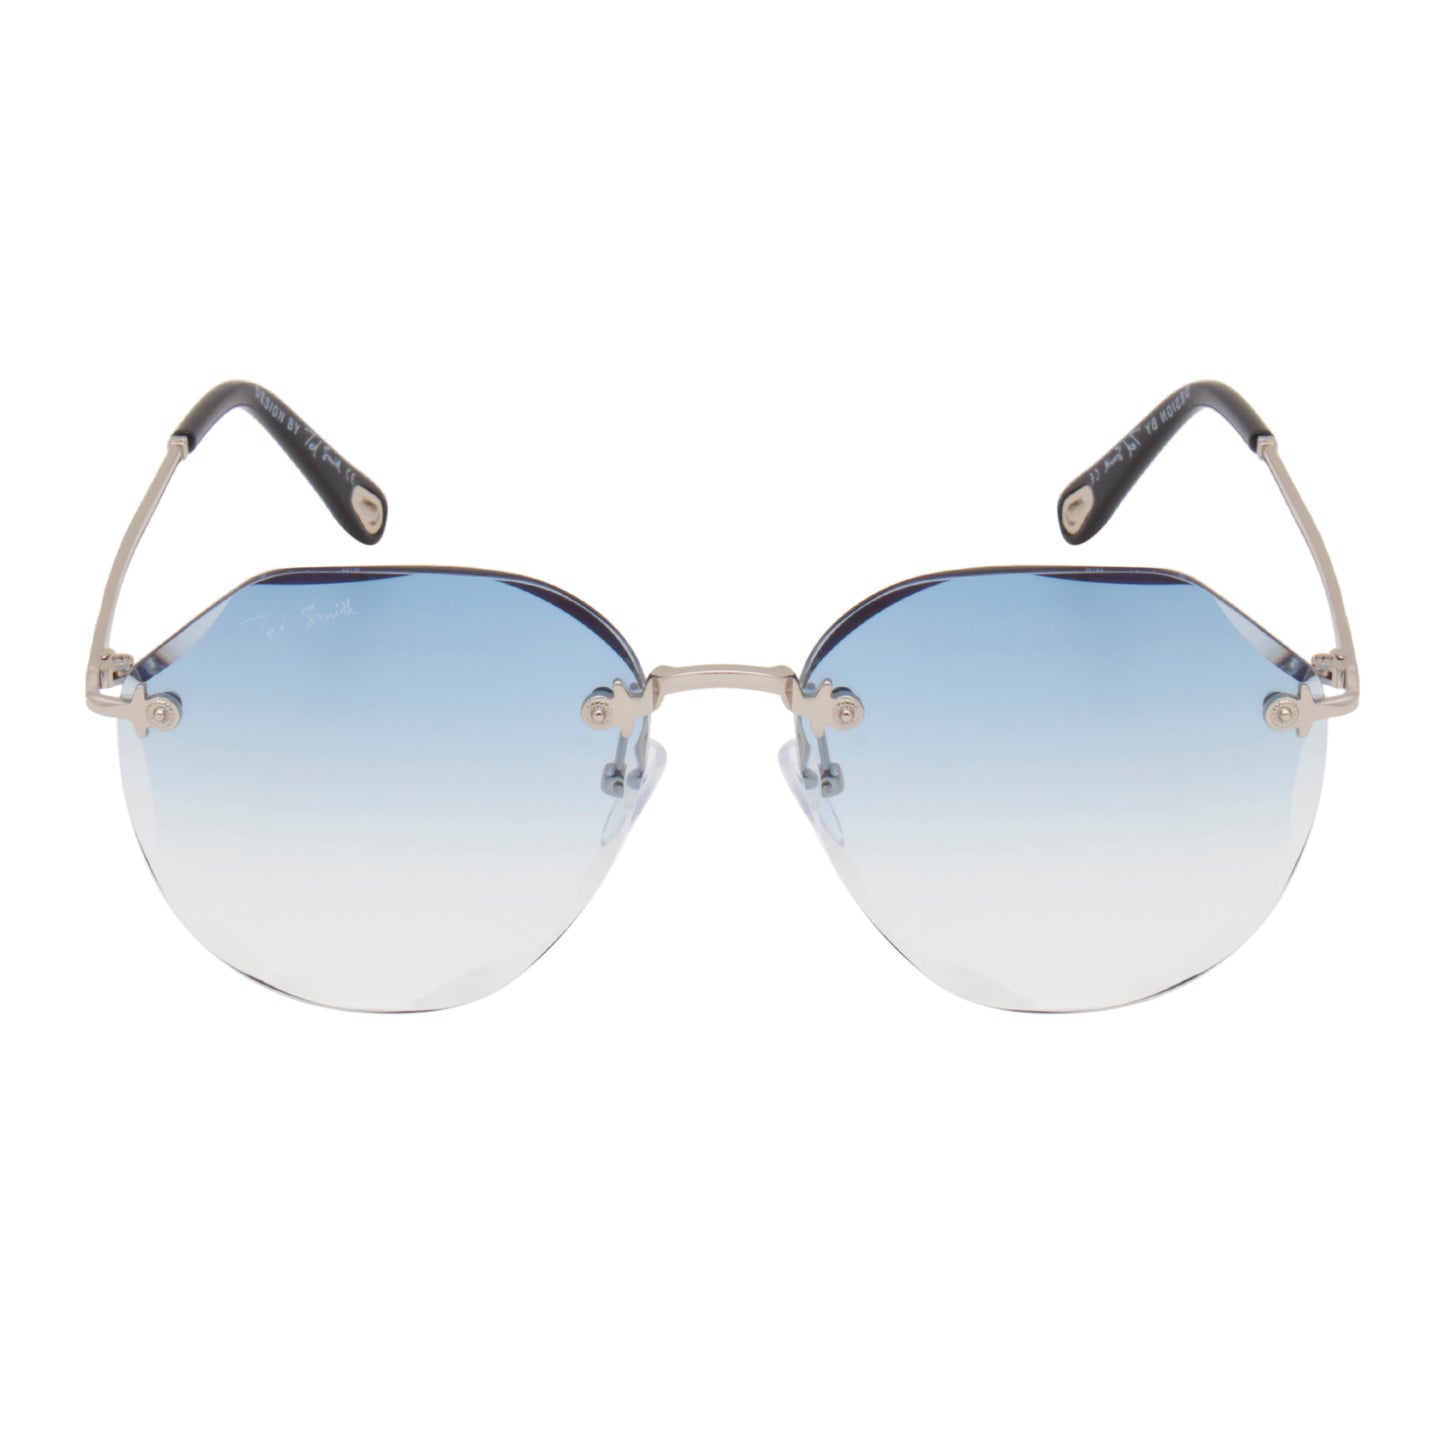 SOLITAIRE 2 SUNGLASSES (IN 3 COLORS)